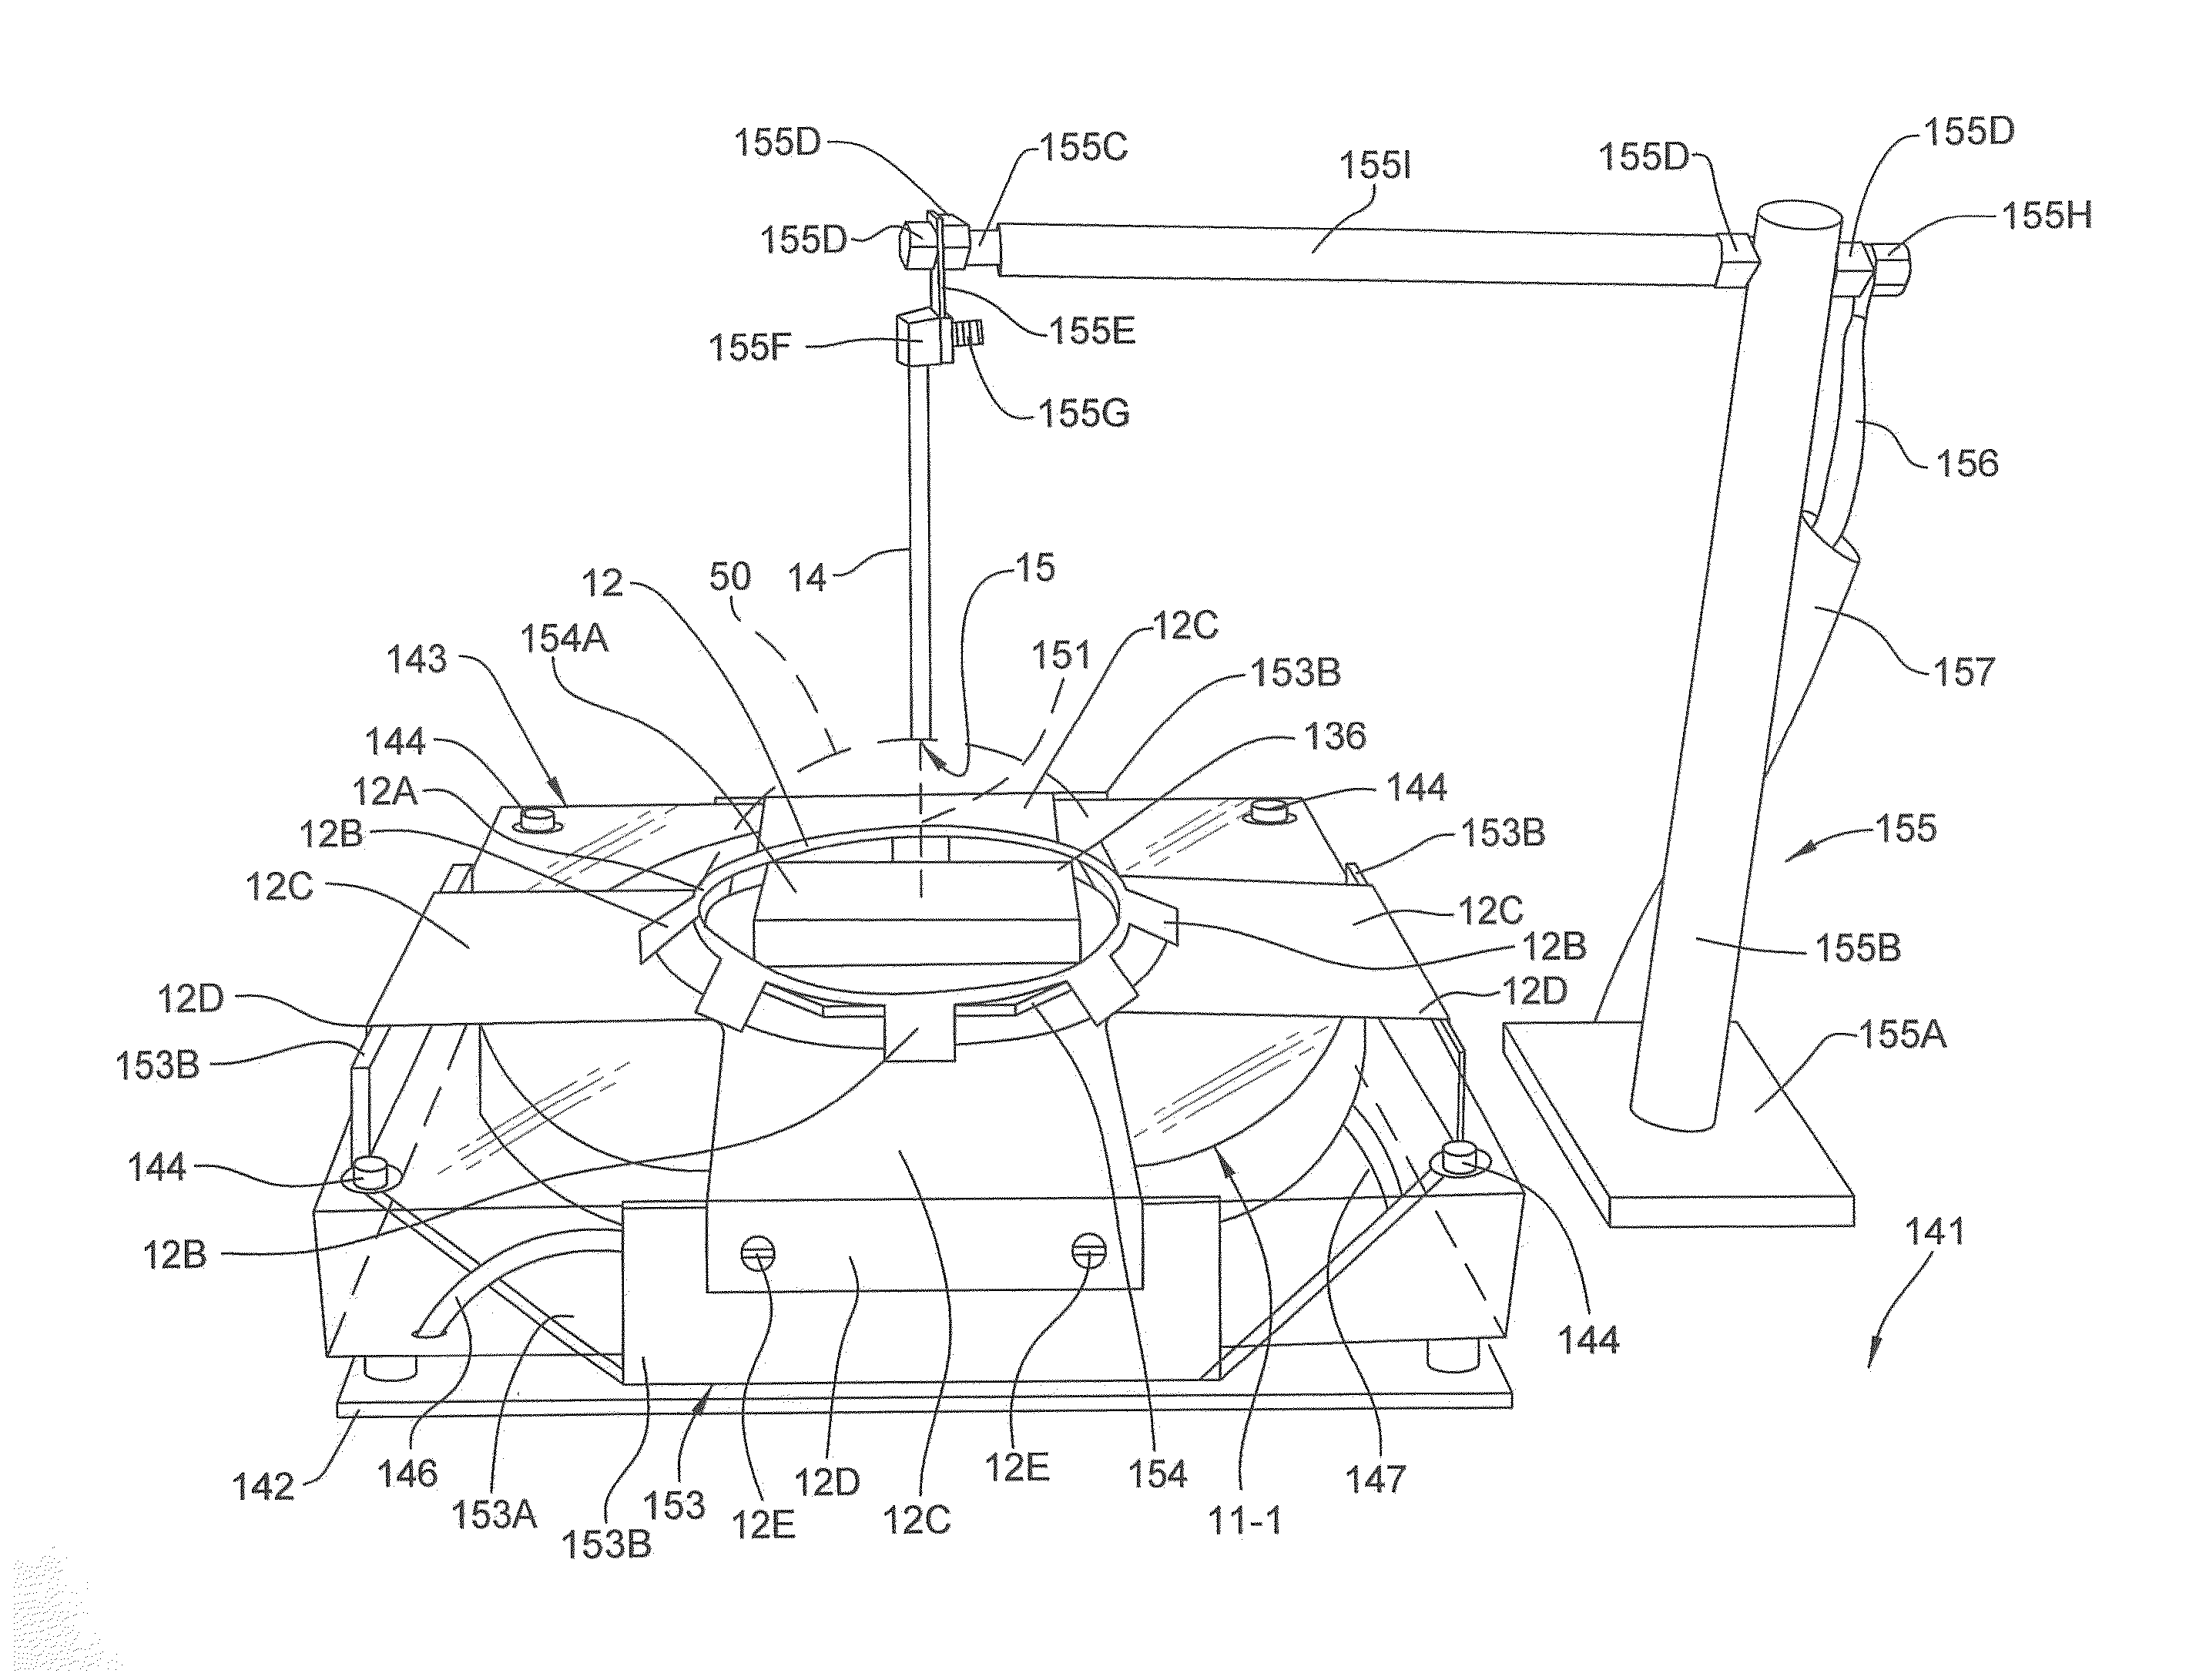 System and method for plasma generation